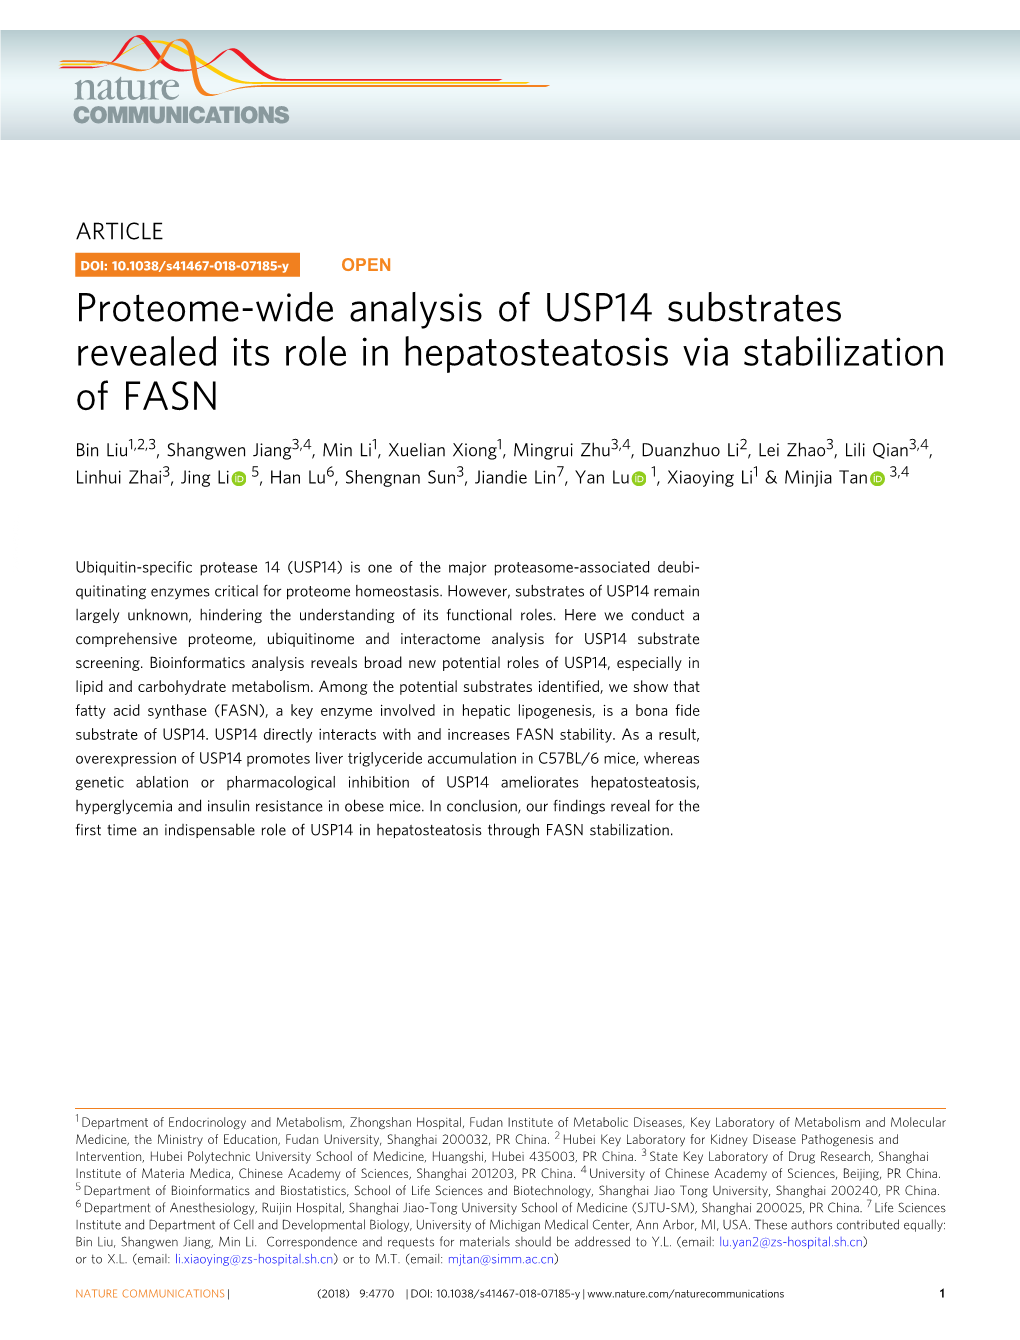 Proteome-Wide Analysis of USP14 Substrates Revealed Its Role in Hepatosteatosis Via Stabilization of FASN